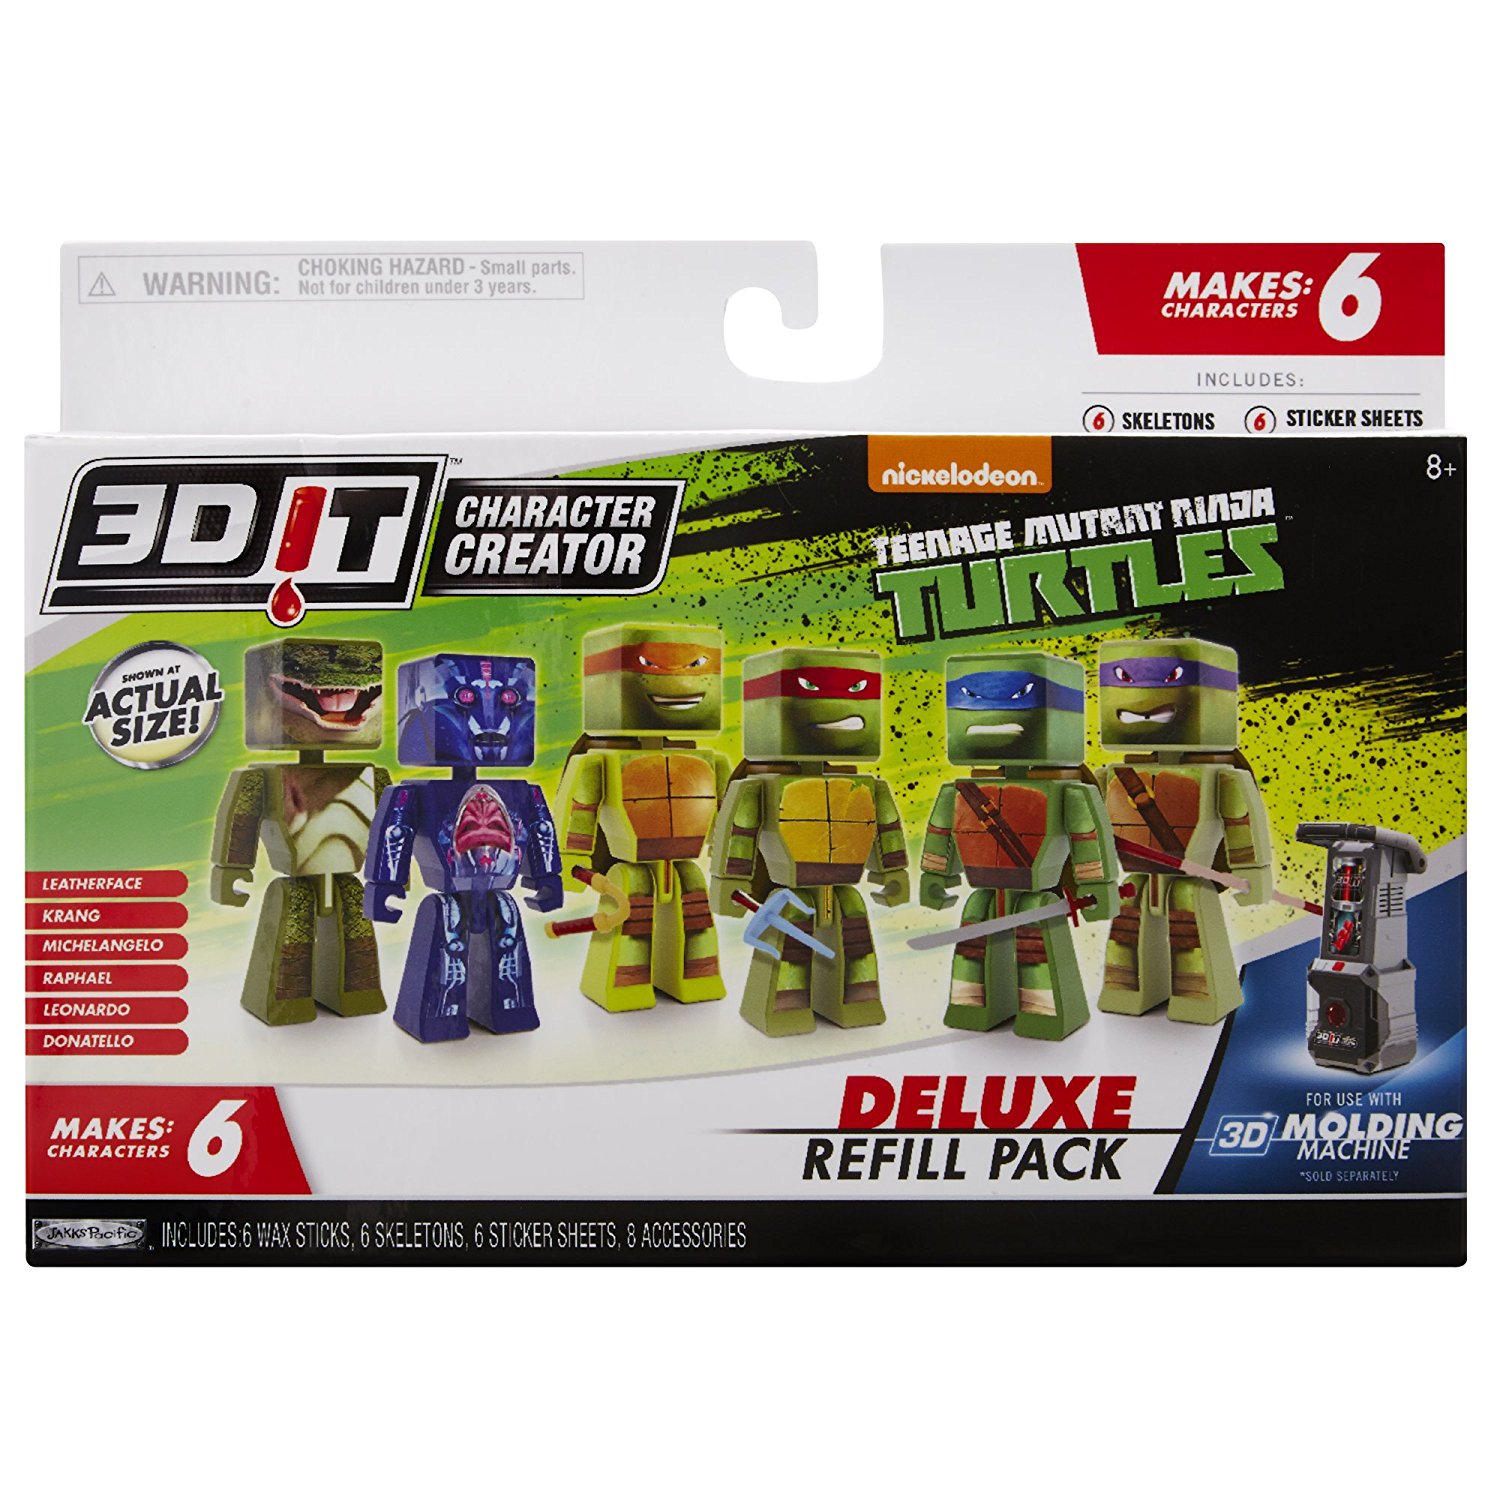 3DIT Character Creator TMNT Deluxe Refill Pack